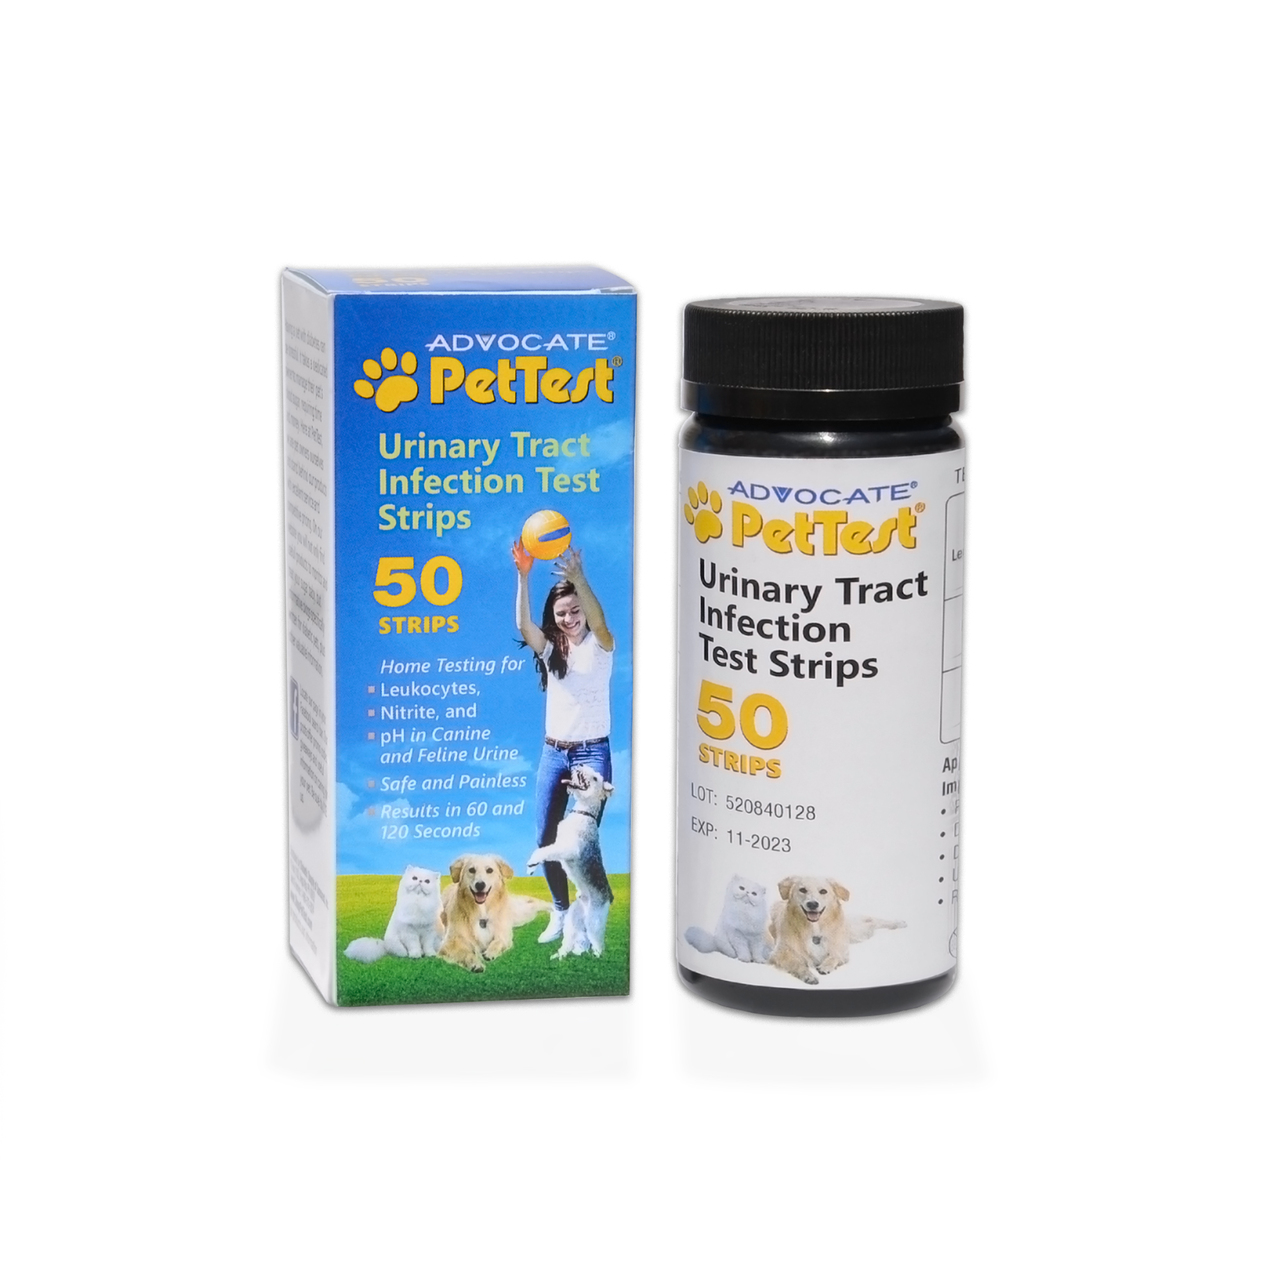 Urinary Tract Infection Test Strips for Pets